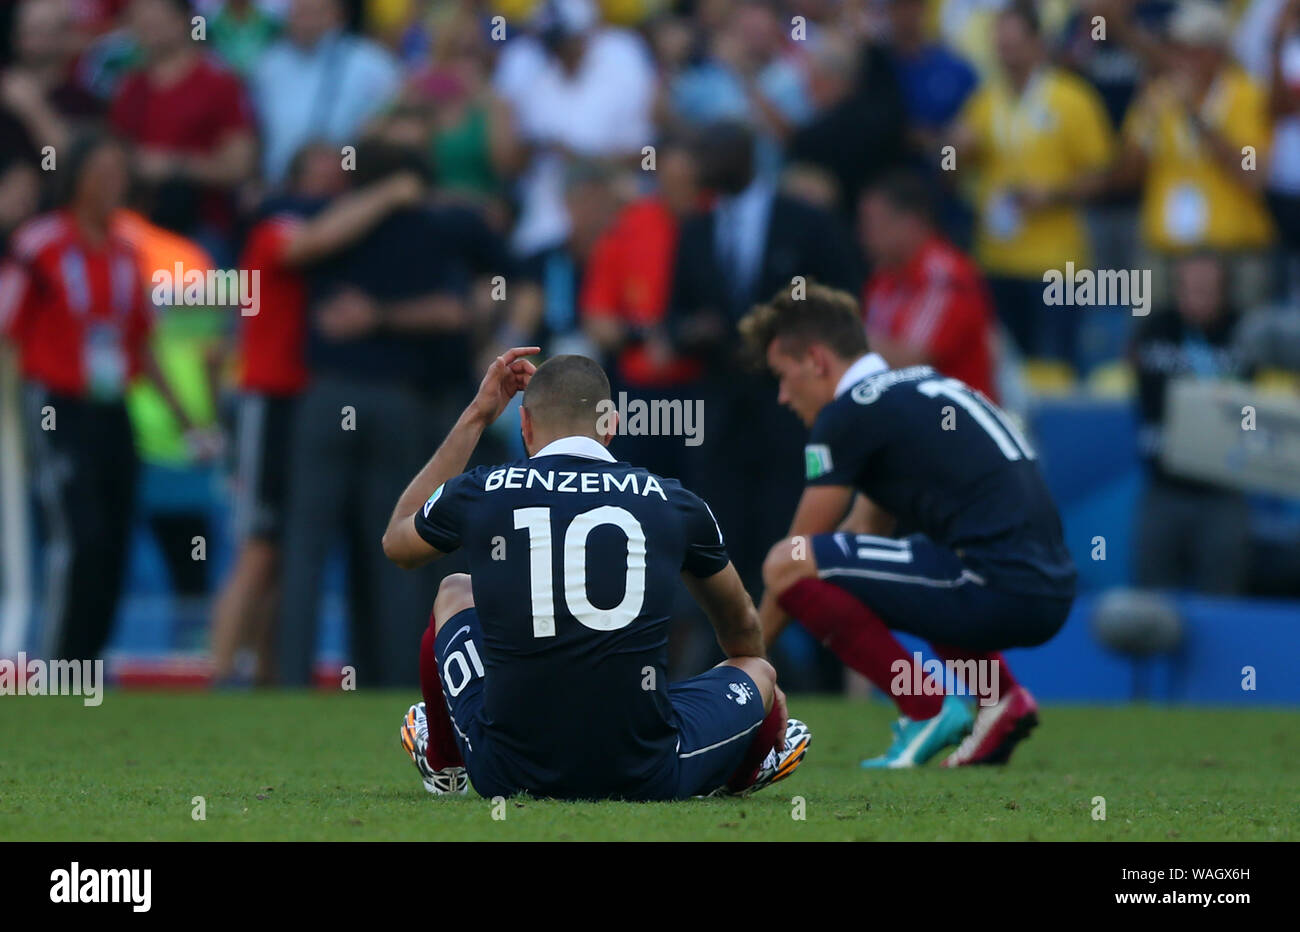 Rio de Janeiro, July 4, 2014. French soccer player Benzema, playing a game during the match between France and Germany, for the 2014 World Cup at the Stock Photo